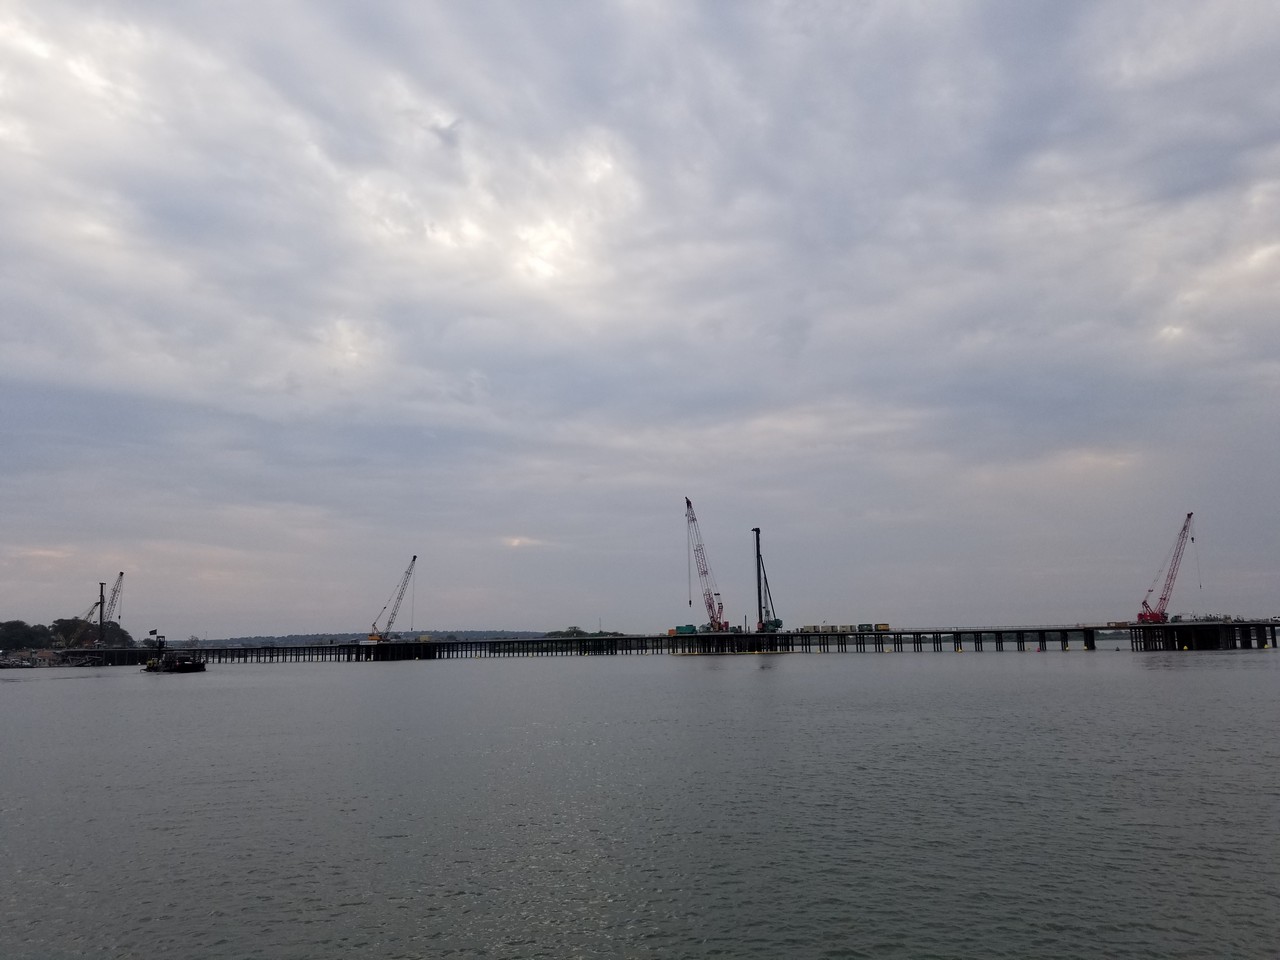 a long bridge over water with cranes